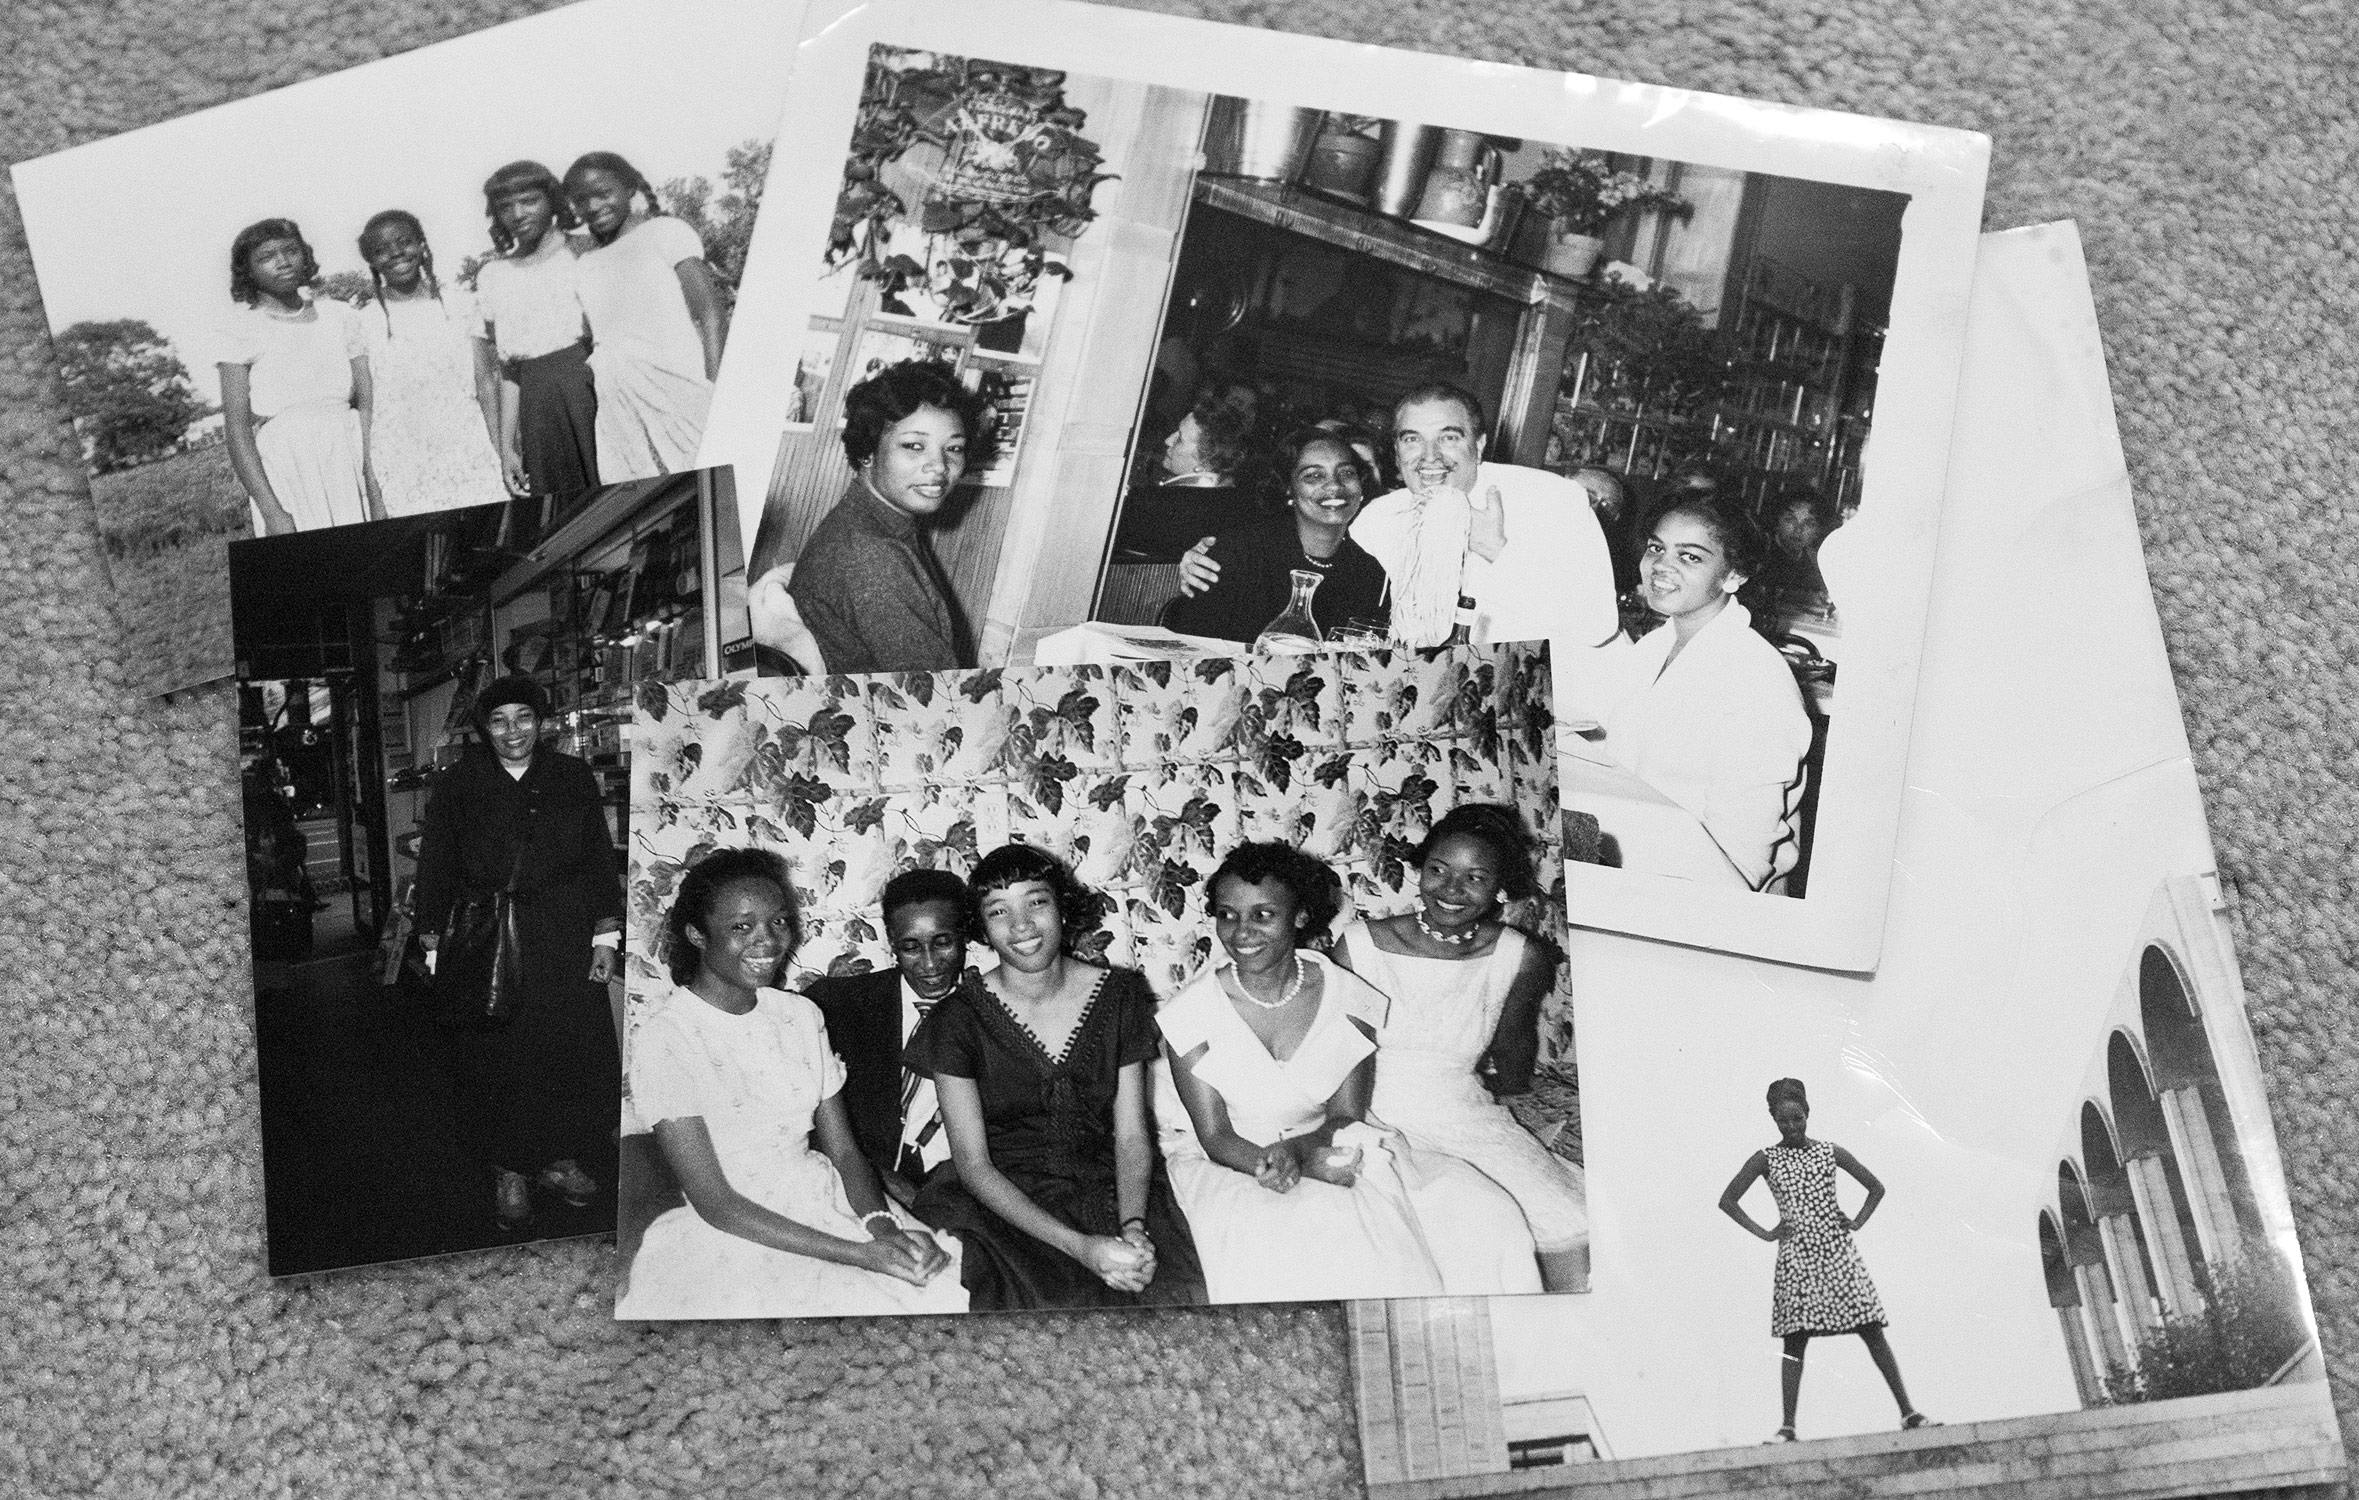 A small collection of Vivian's photographs from her childhood in Texas and her publishing days in New York.